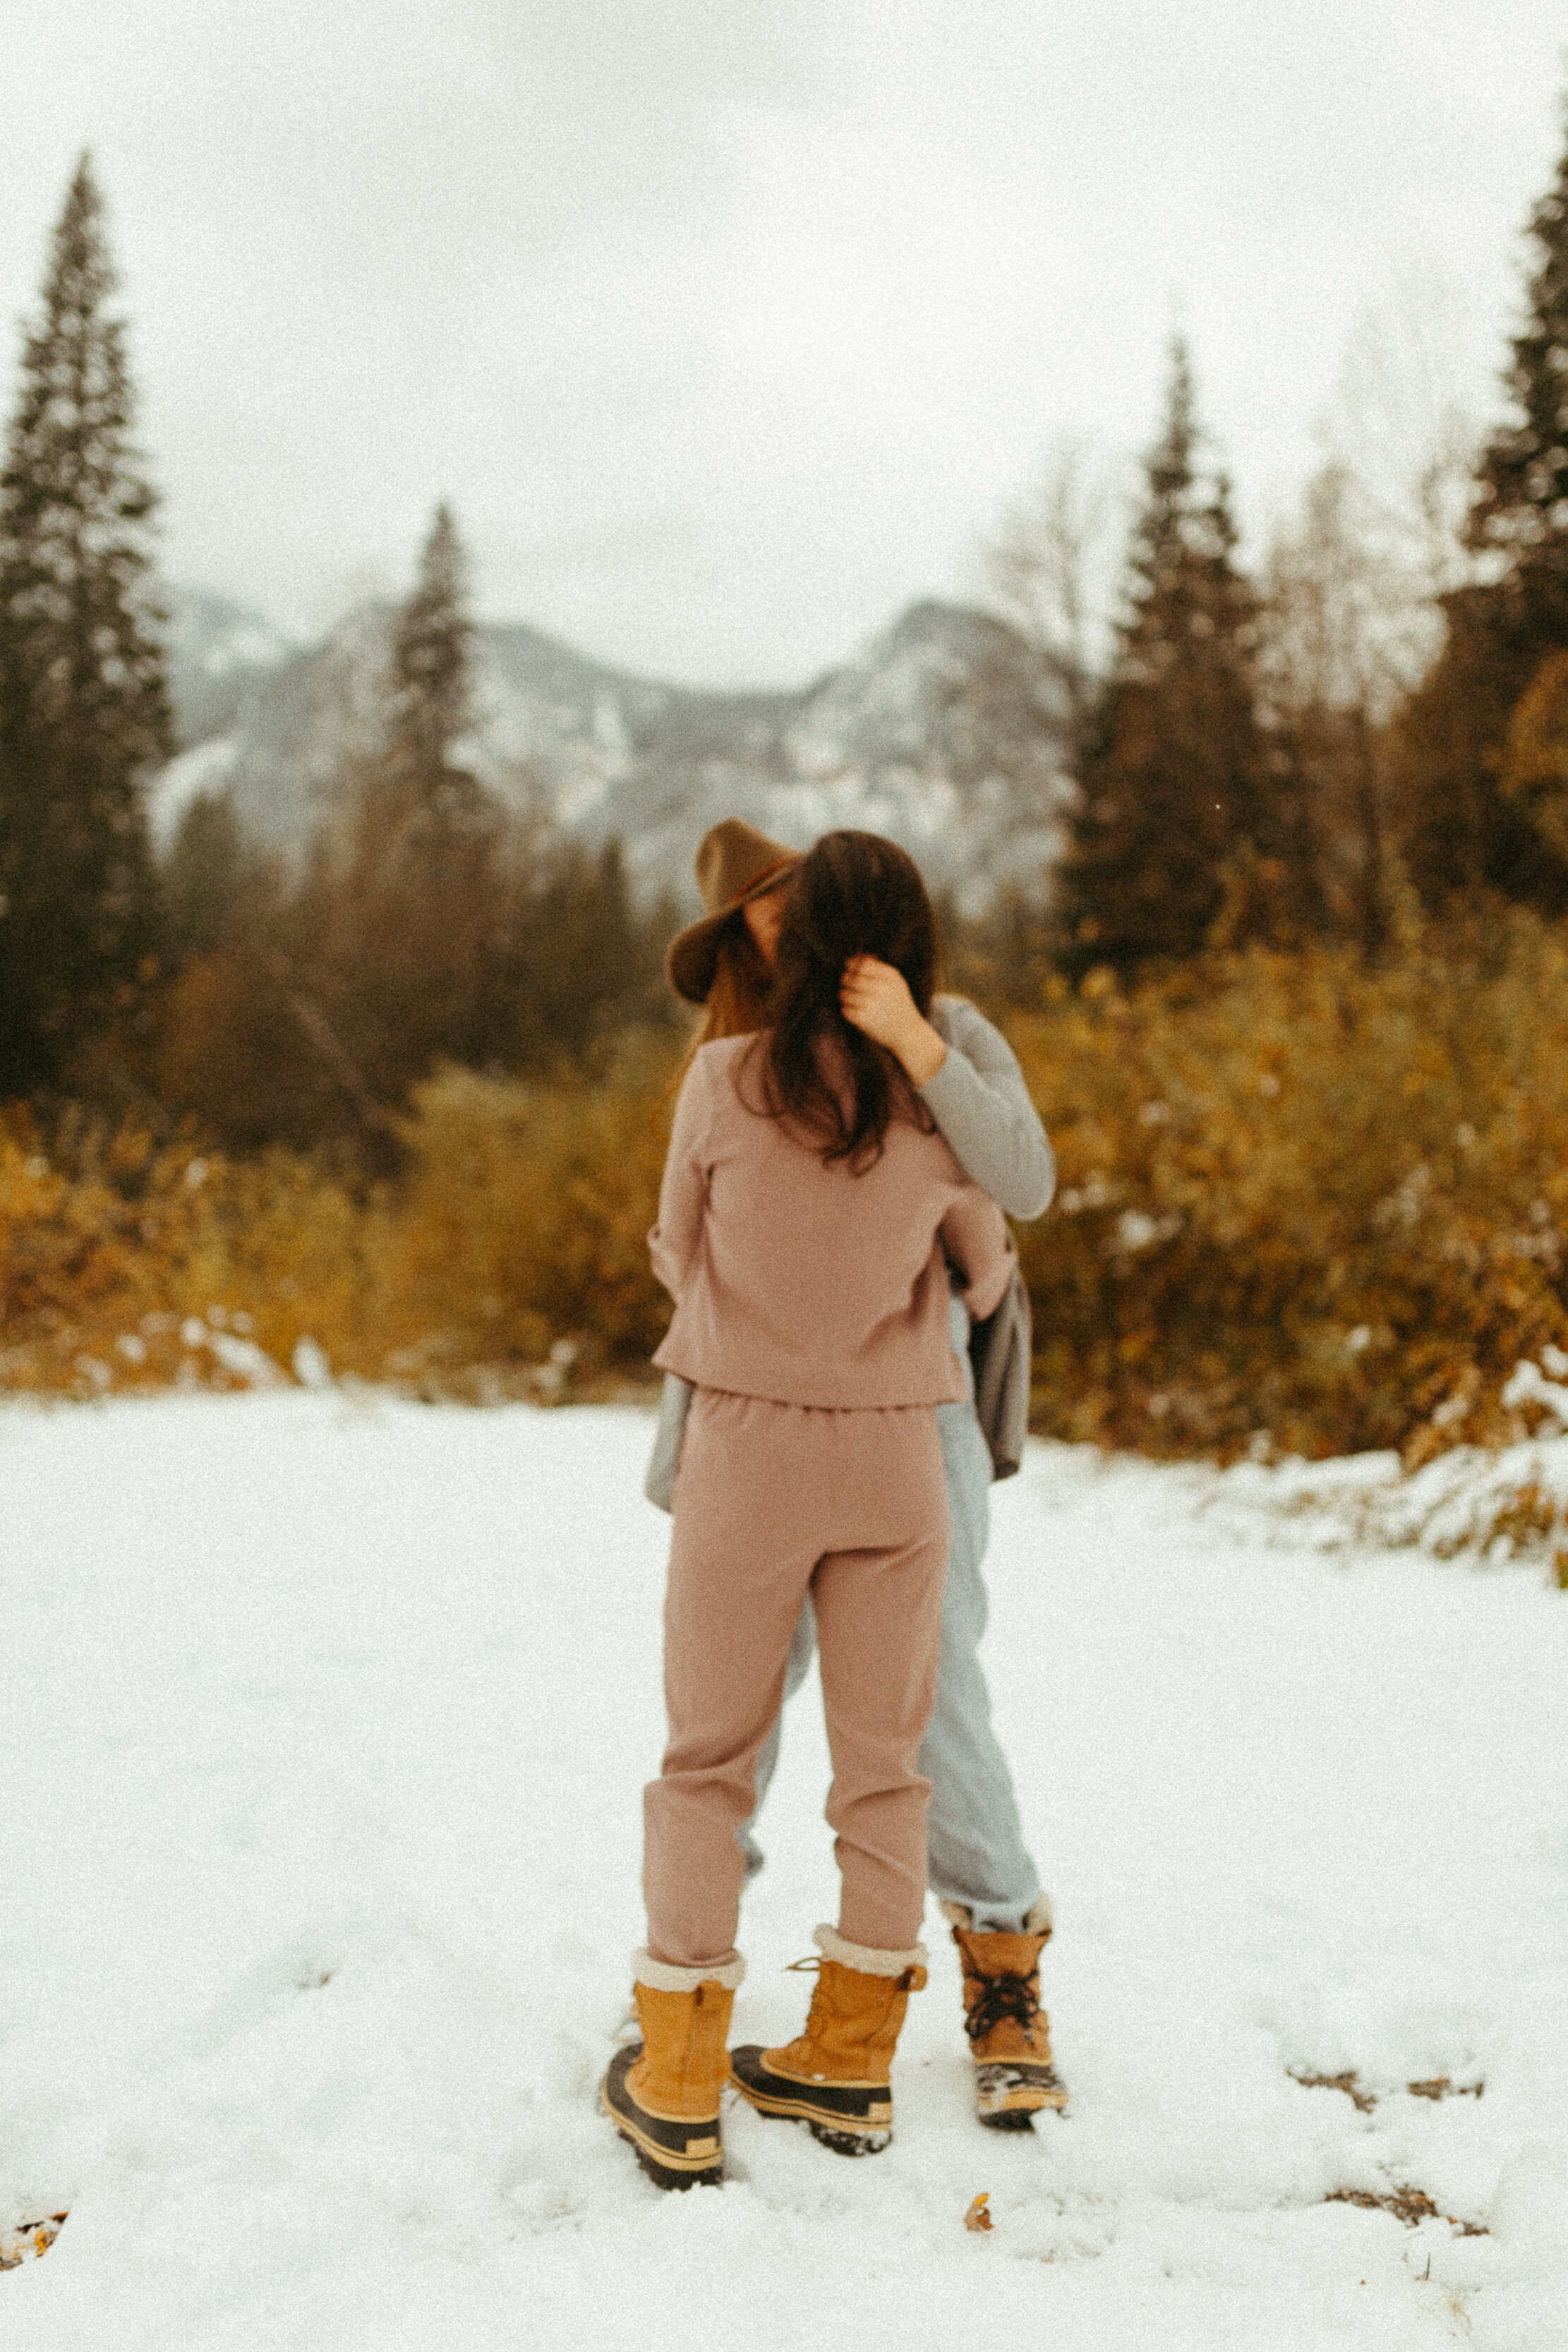 queer-gay-lesbian-trans-affirming-lgbtq-adventure-elopement-intimate-wedding-photographer-pnw-pacific-northwest-pnw-mountain-stream-forest-cowgay-tacoma-seattle-washington-portland-oregon-halle-roland-photography-non-binary-analog-film-artist-165-127.jpg